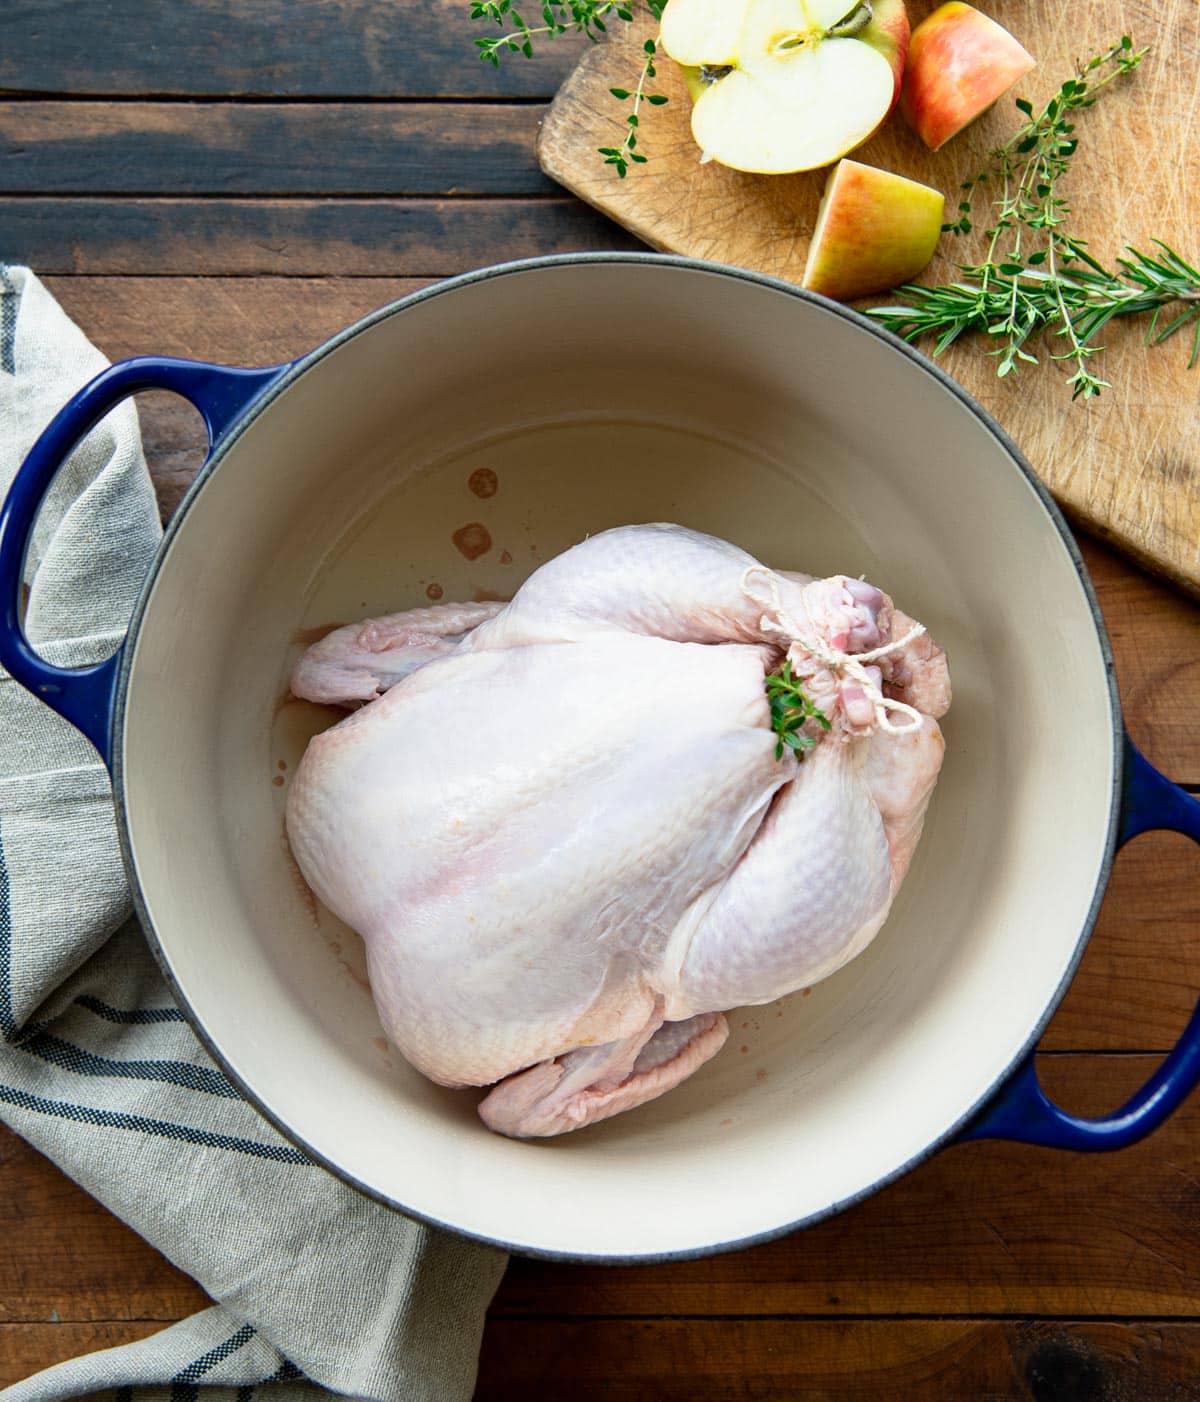 Whole chicken in a Dutch oven before roasting.